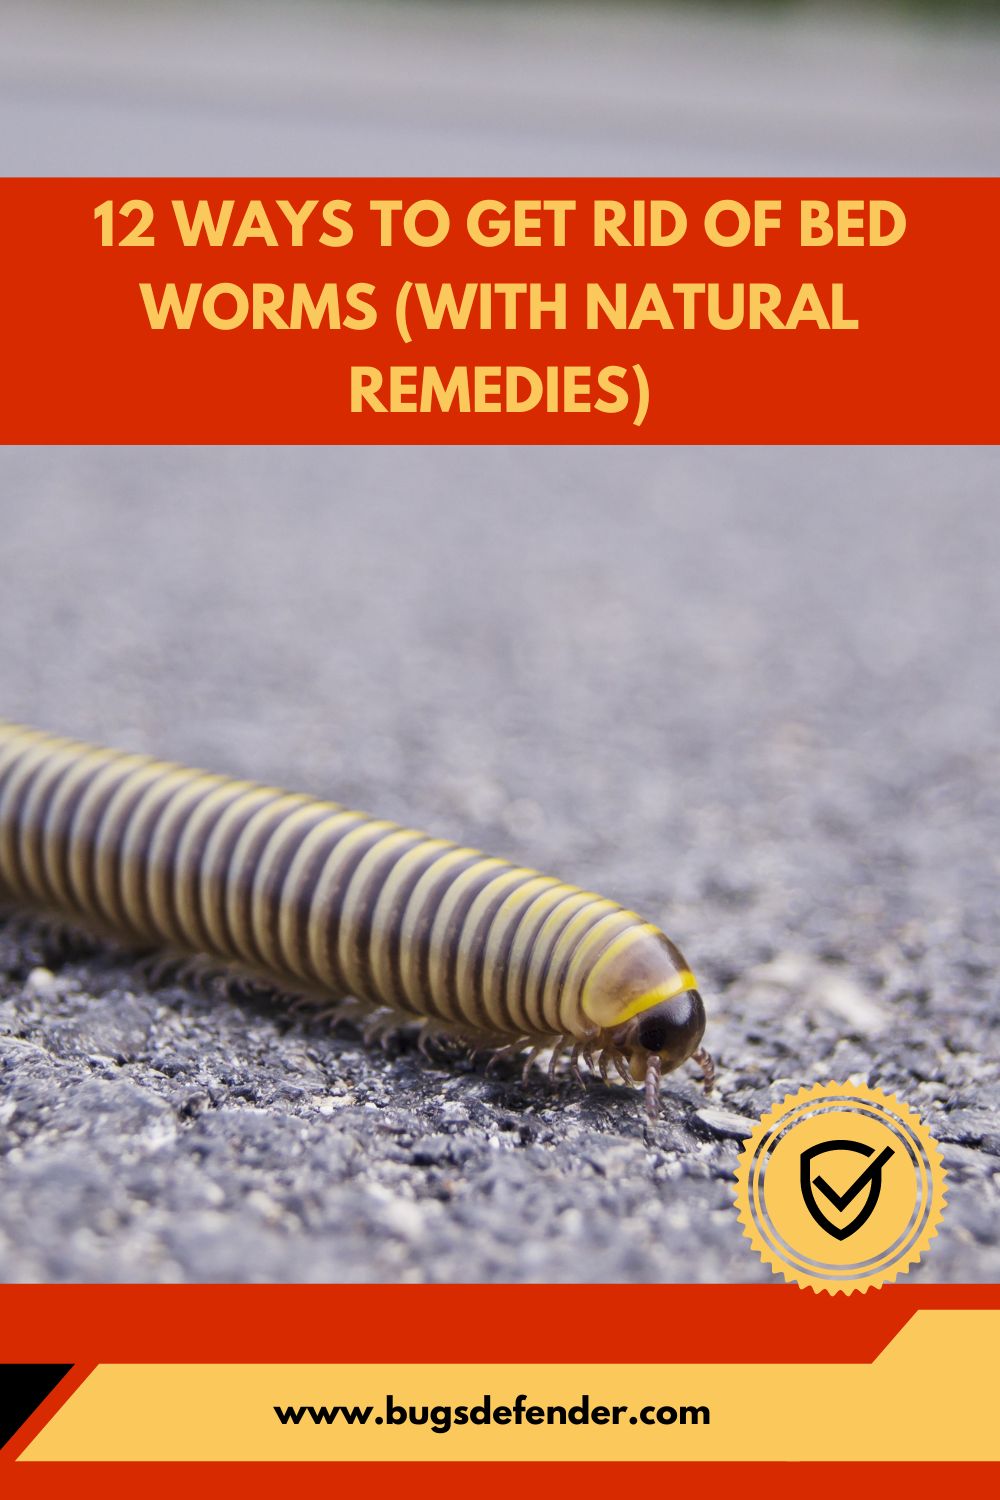 12 Ways to Get Rid of Bed Worms pin1